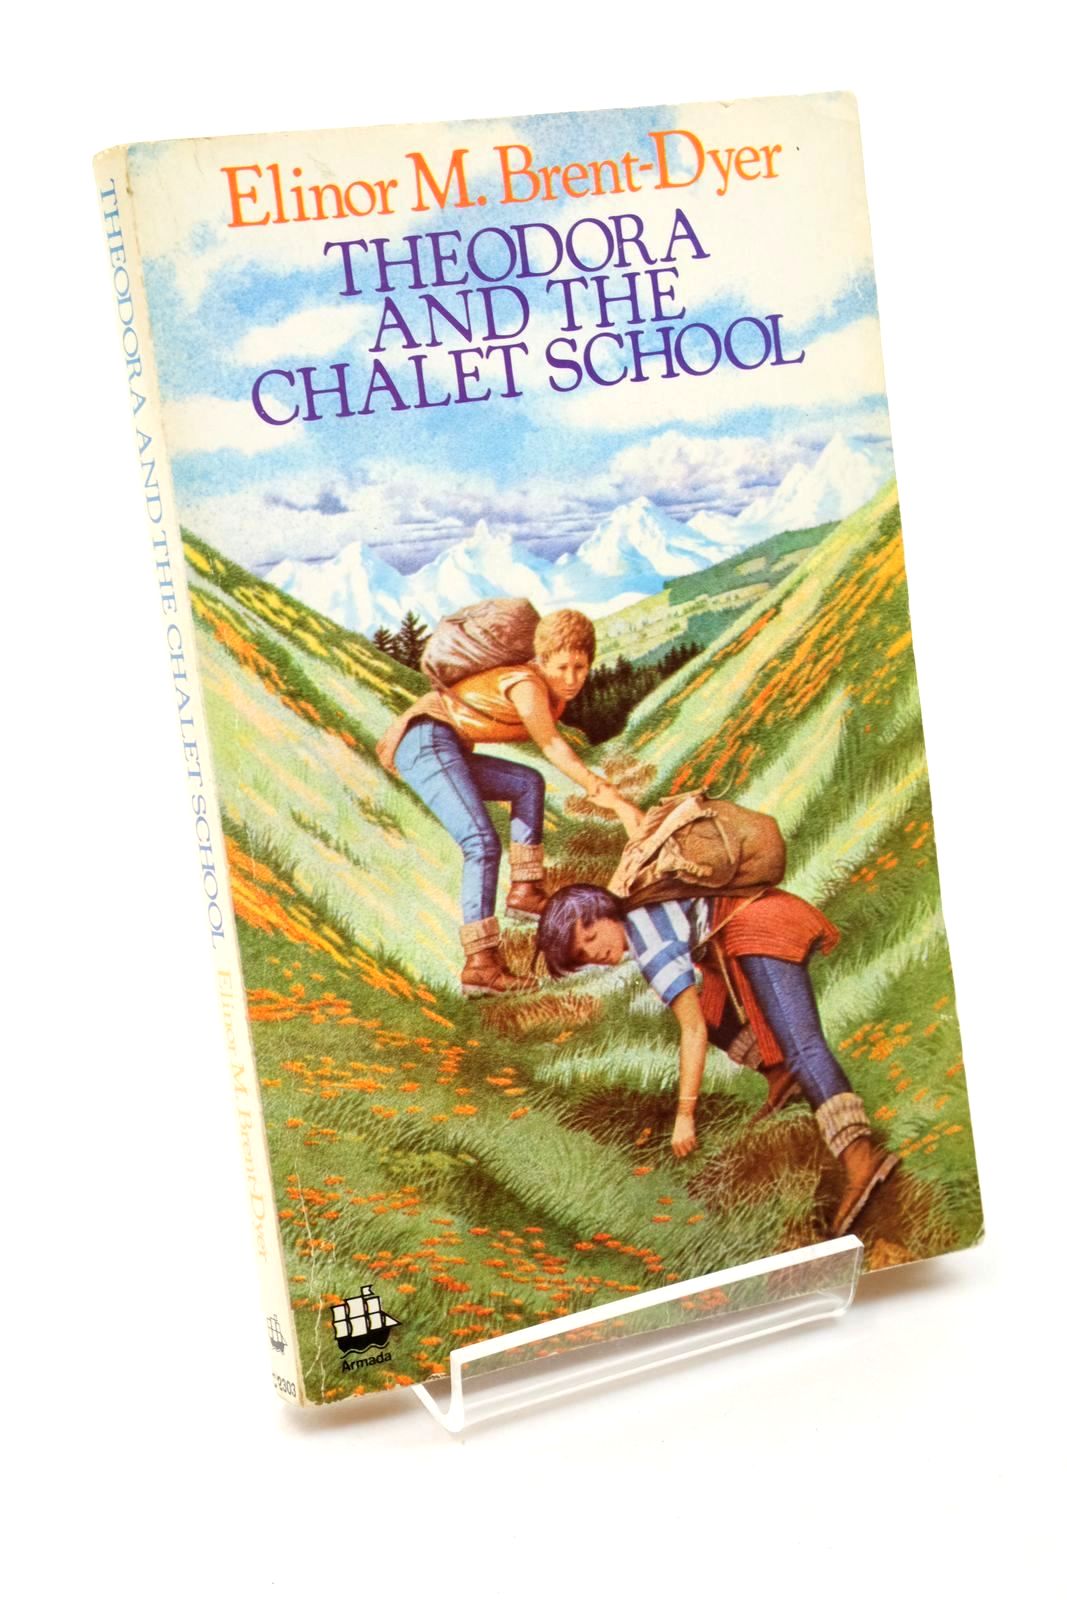 Photo of THEODORA AND THE CHALET SCHOOL written by Brent-Dyer, Elinor M. published by Armada (STOCK CODE: 1322576)  for sale by Stella & Rose's Books